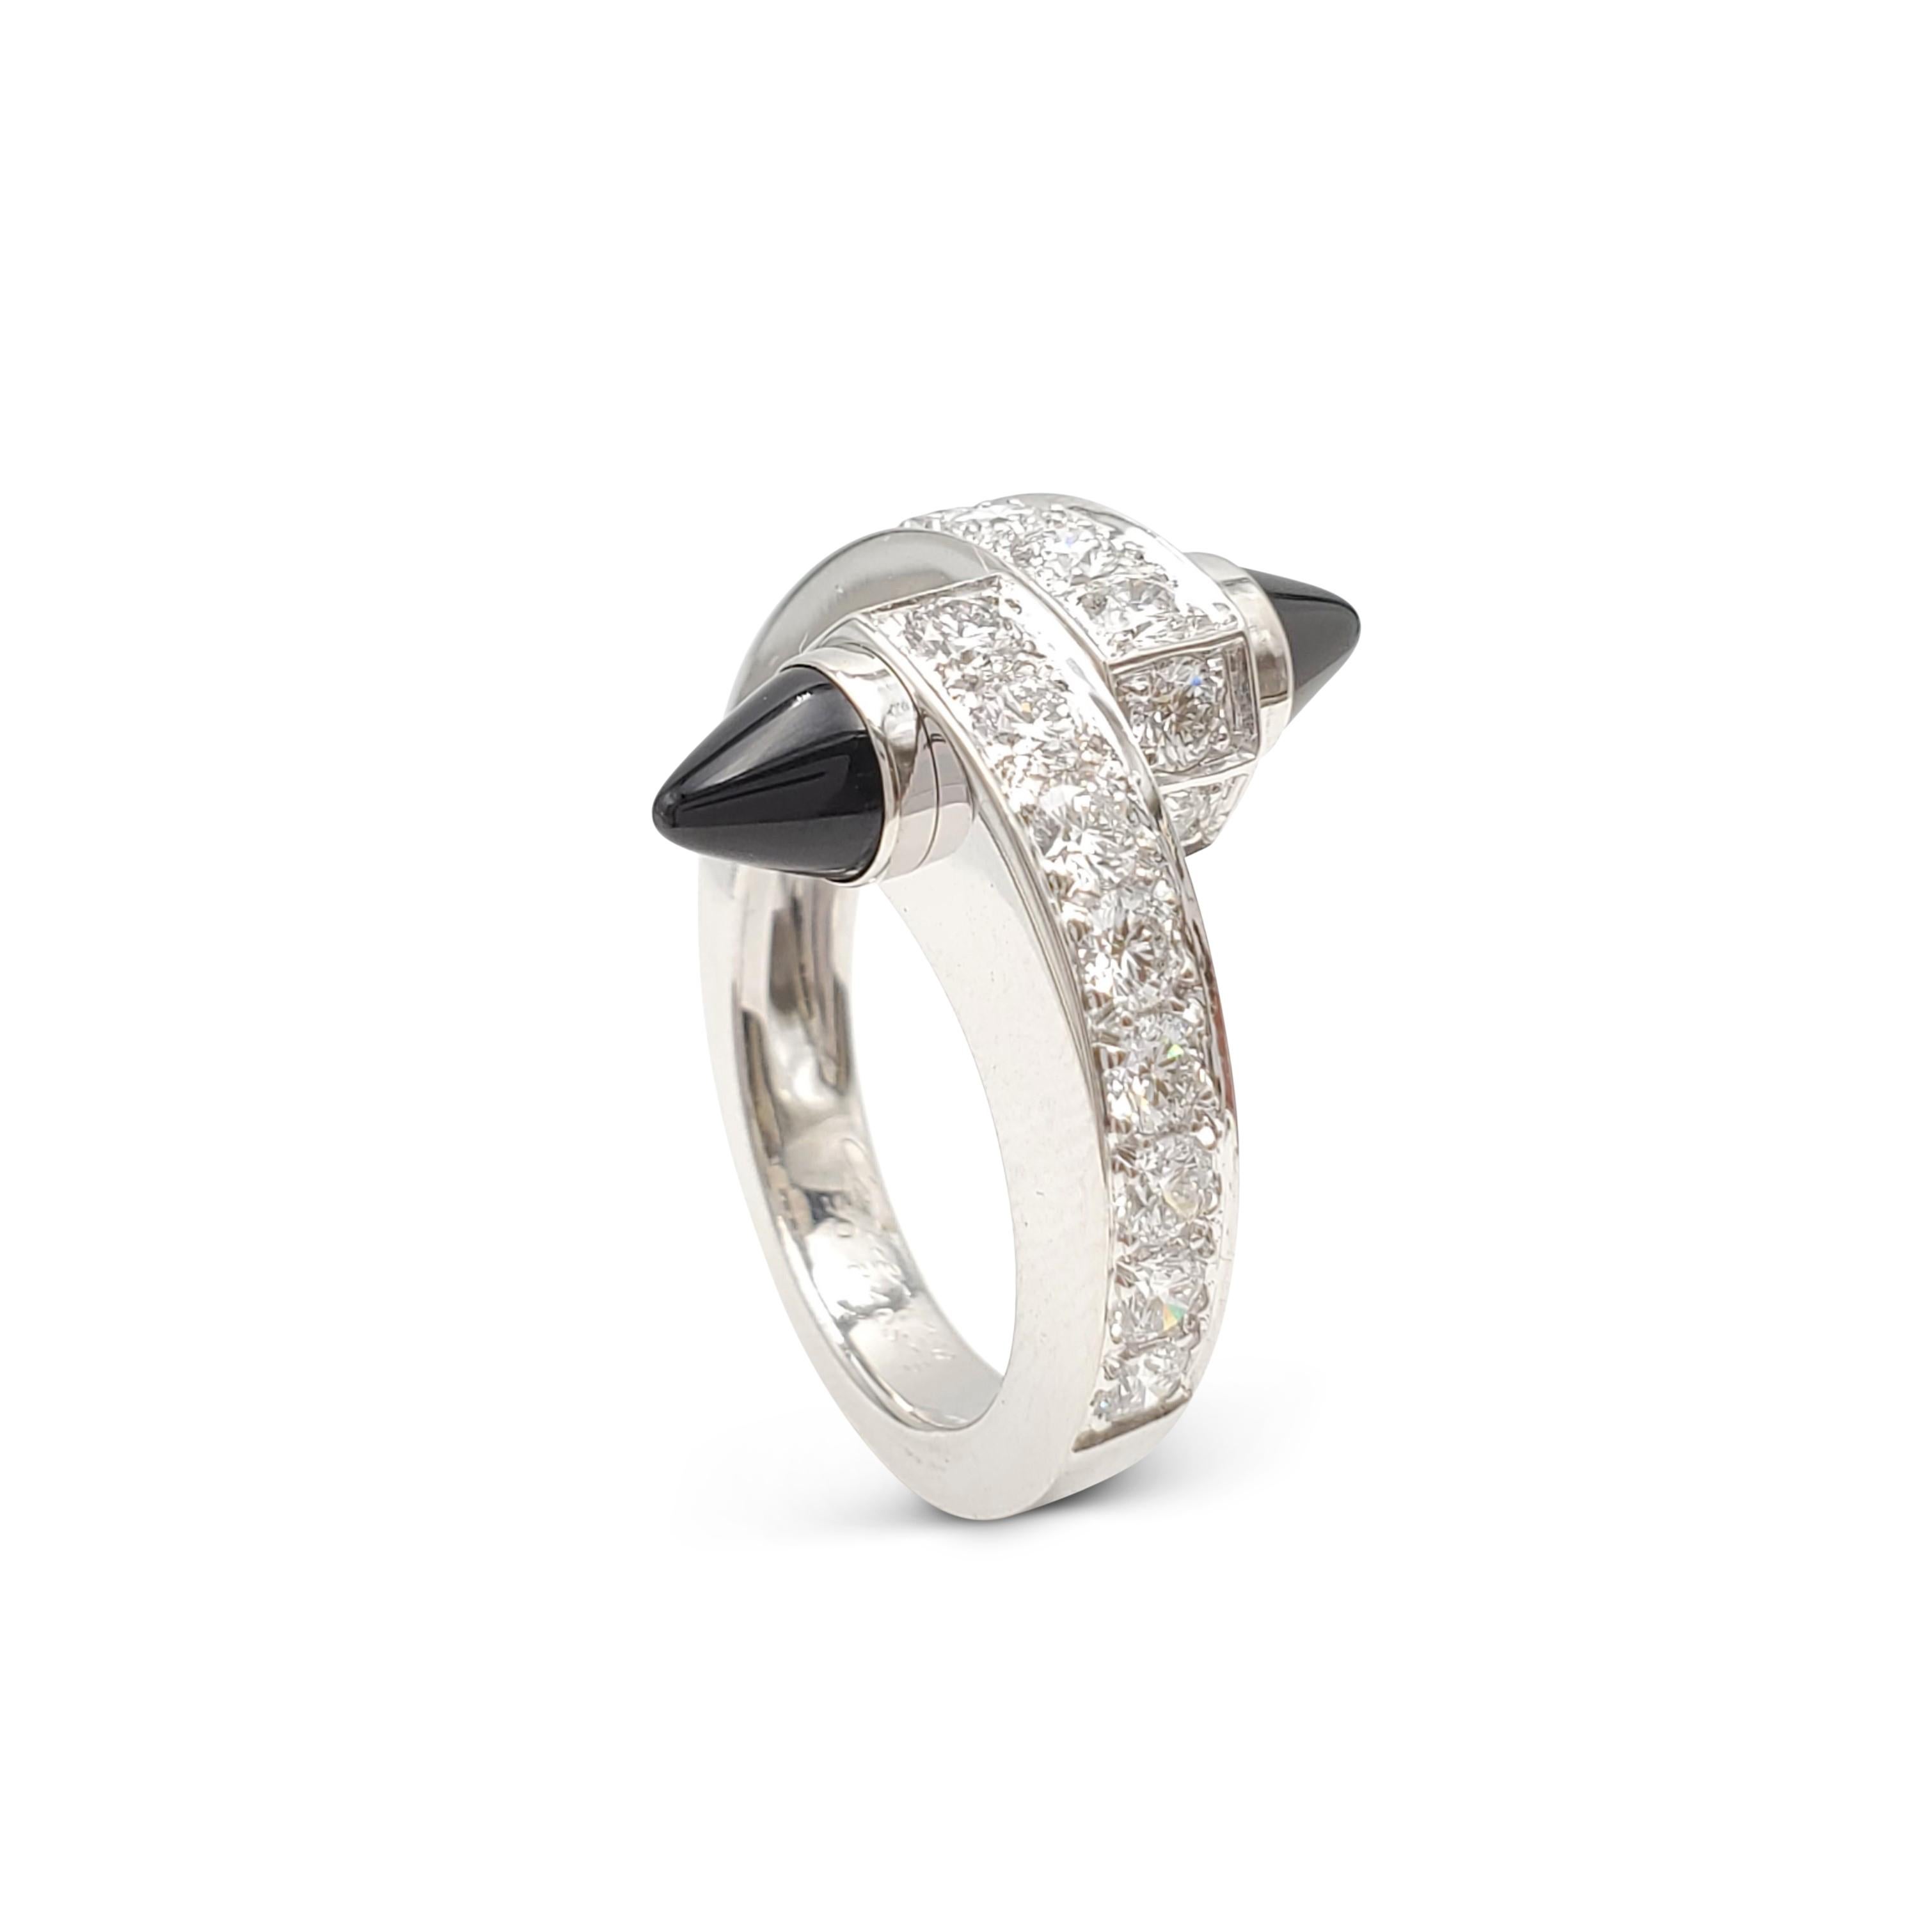 Authentic Cartier bypass ring from the 'Menotte' collection is crafted in 18 karat white gold and features two pointed polished black onyx gemstones set at the end of each bypass. The ring is set with an estimated 0.80 carats of high-quality round